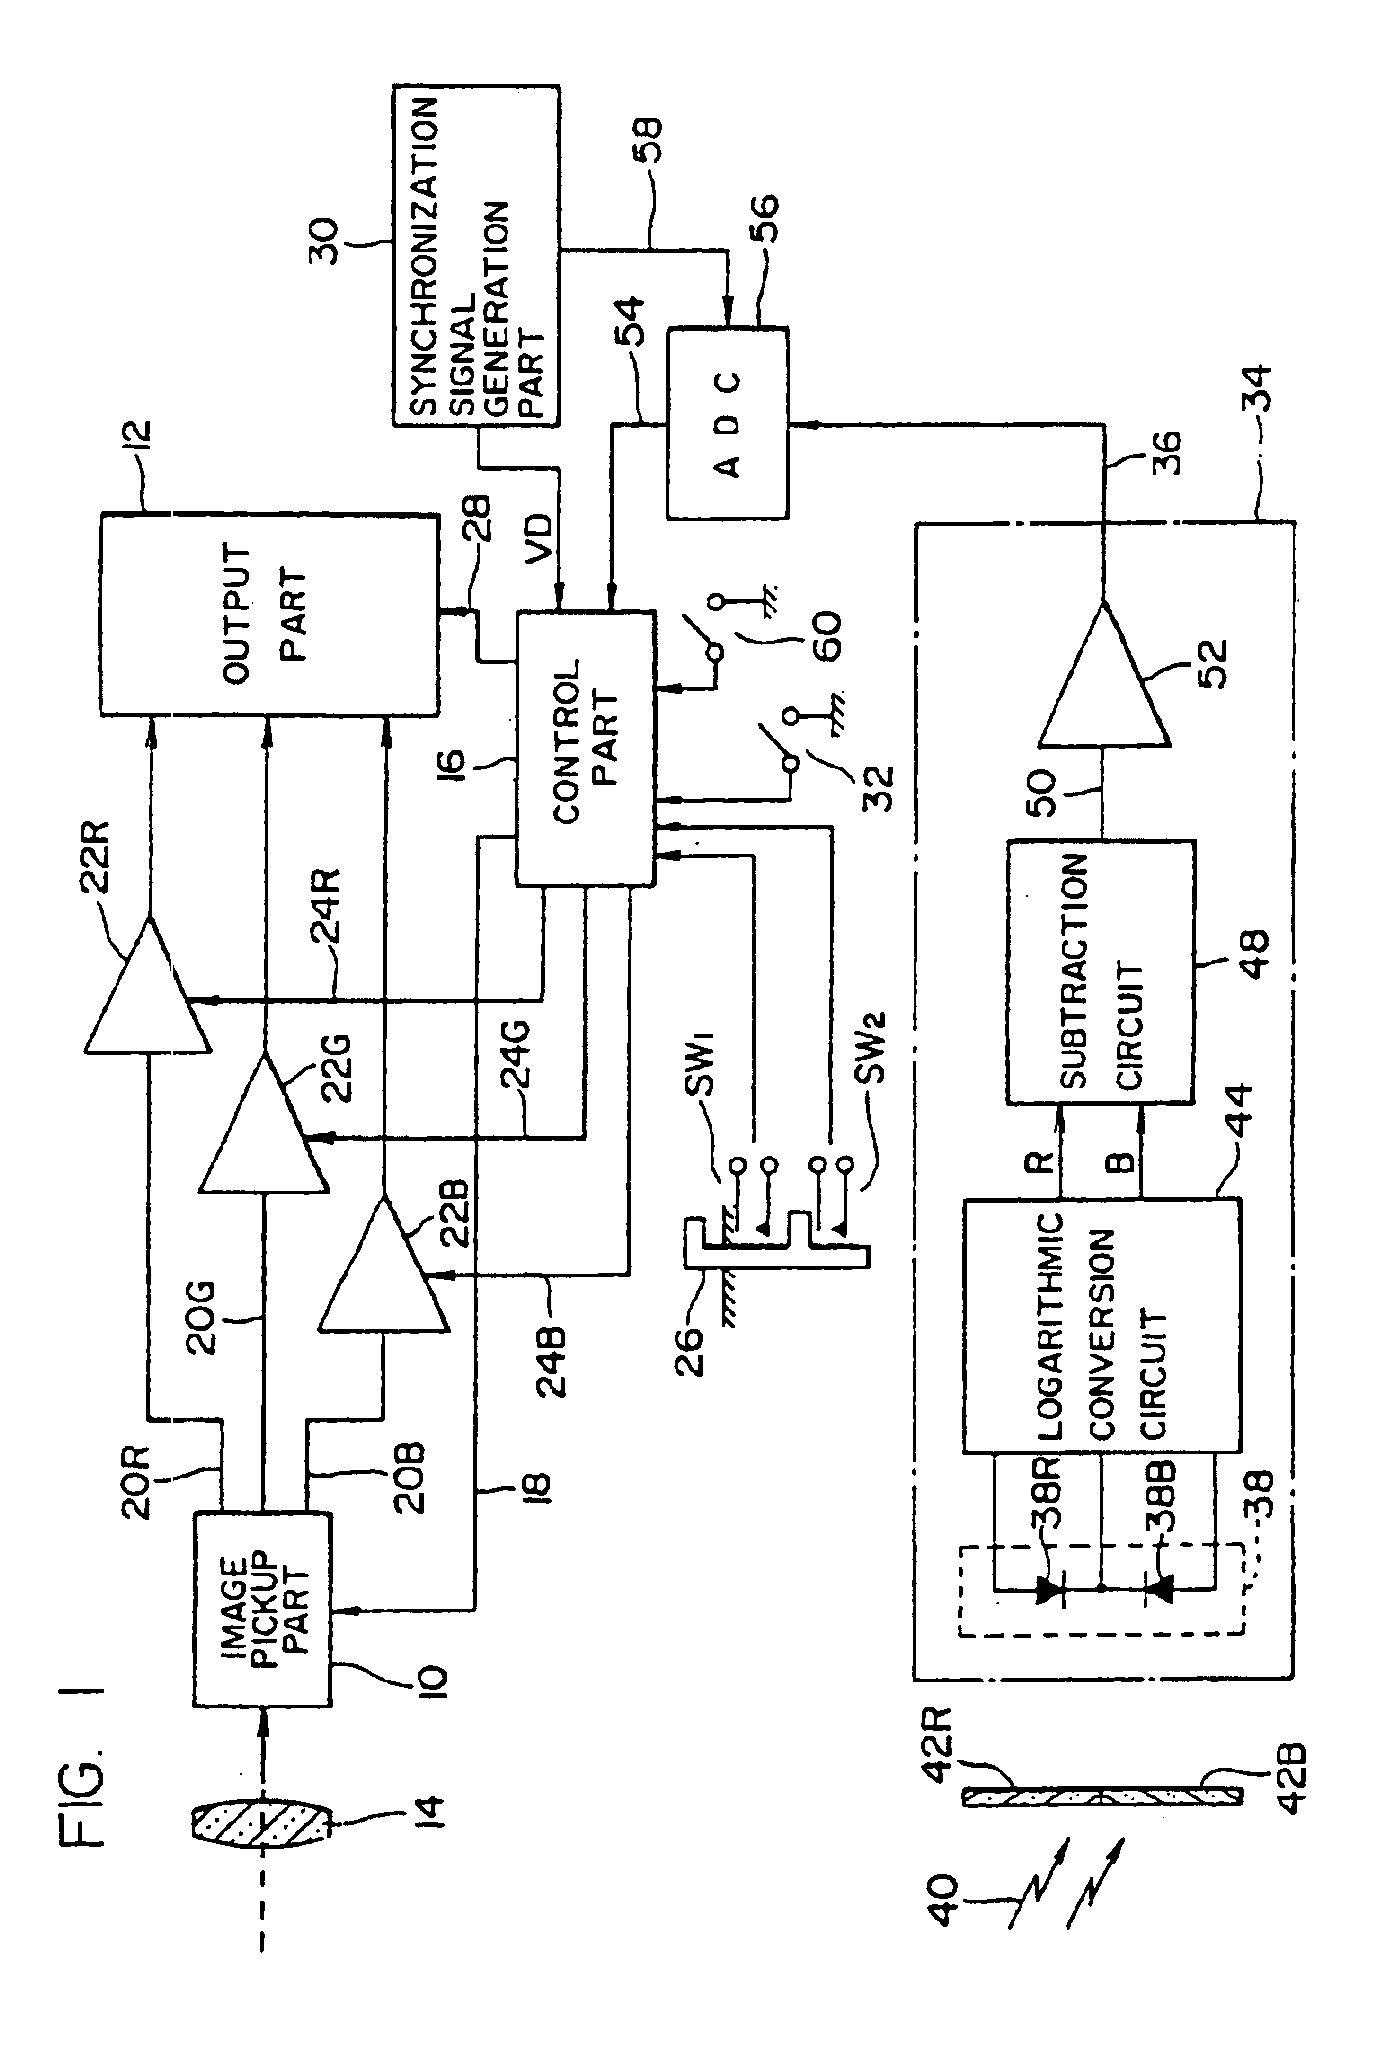 White balance adjusting device for a camera